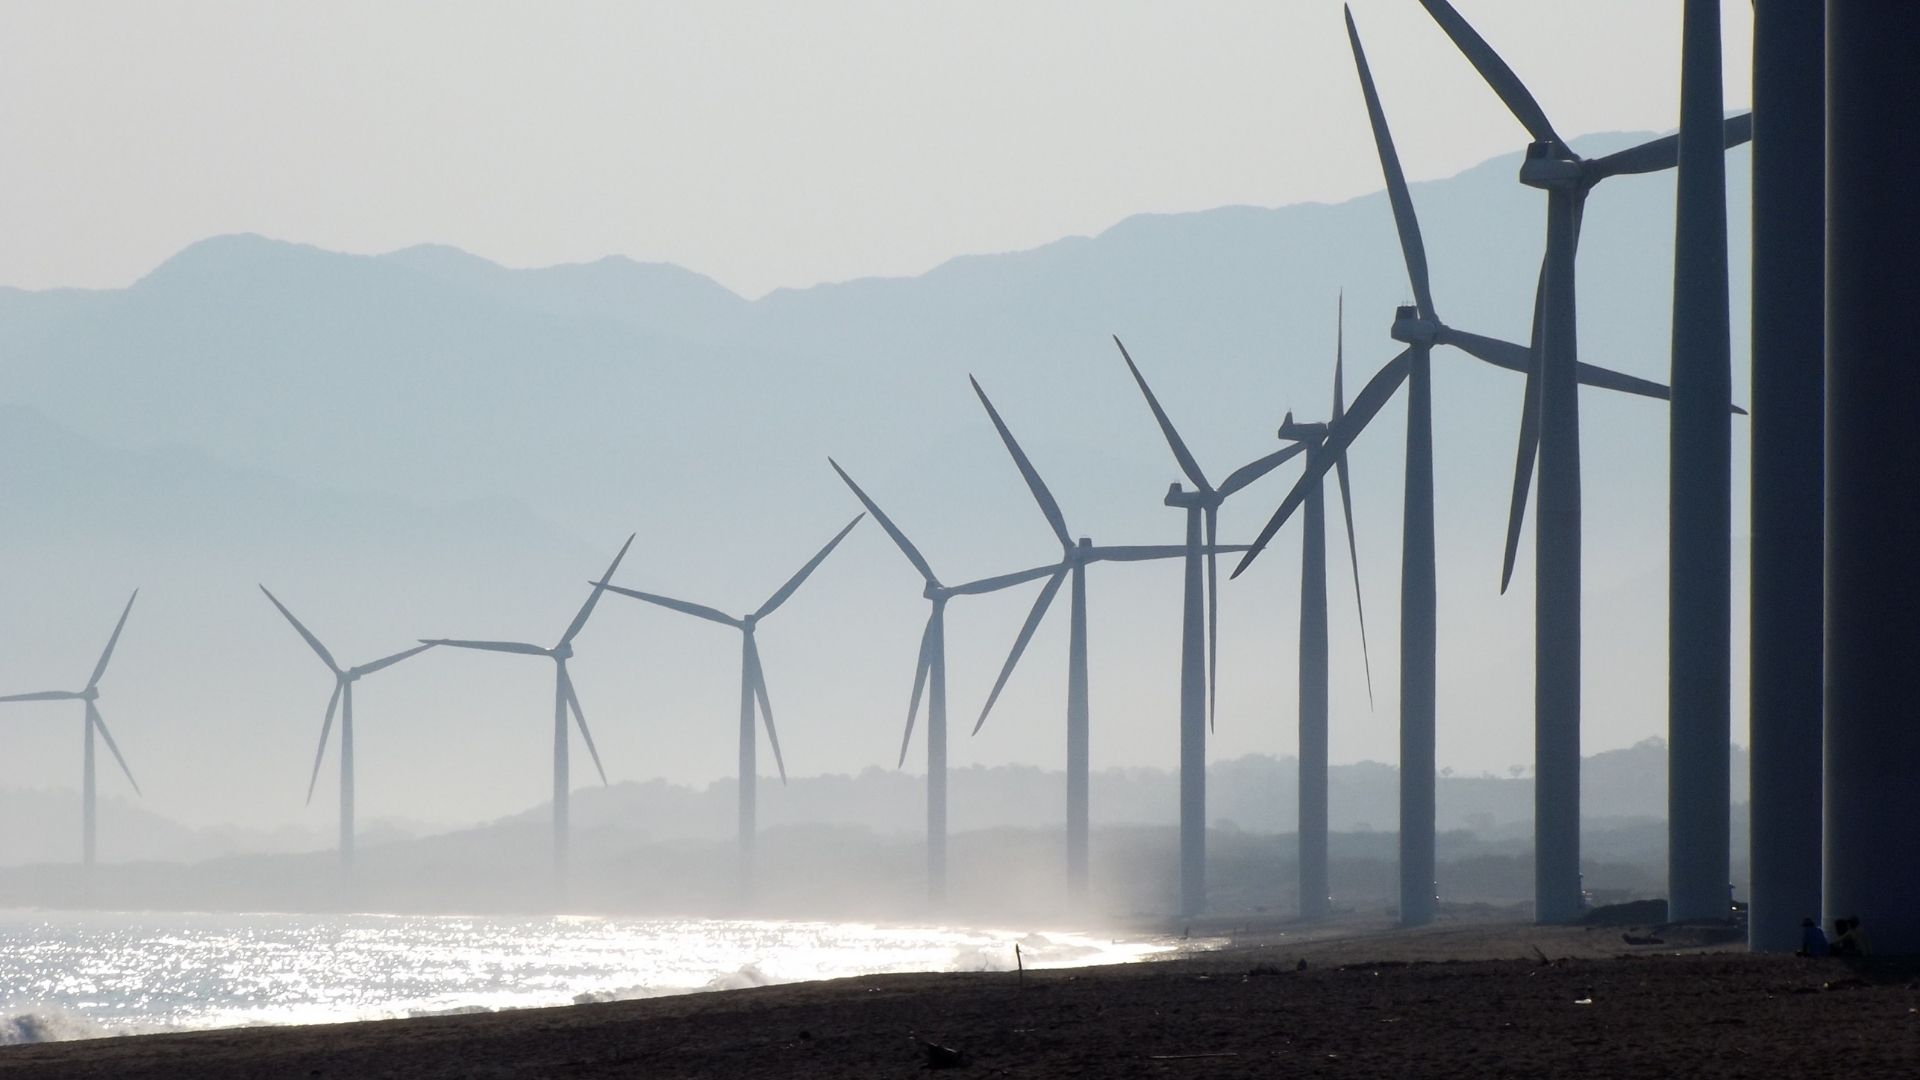 Are your turbines underperforming? Here’s how to get help.